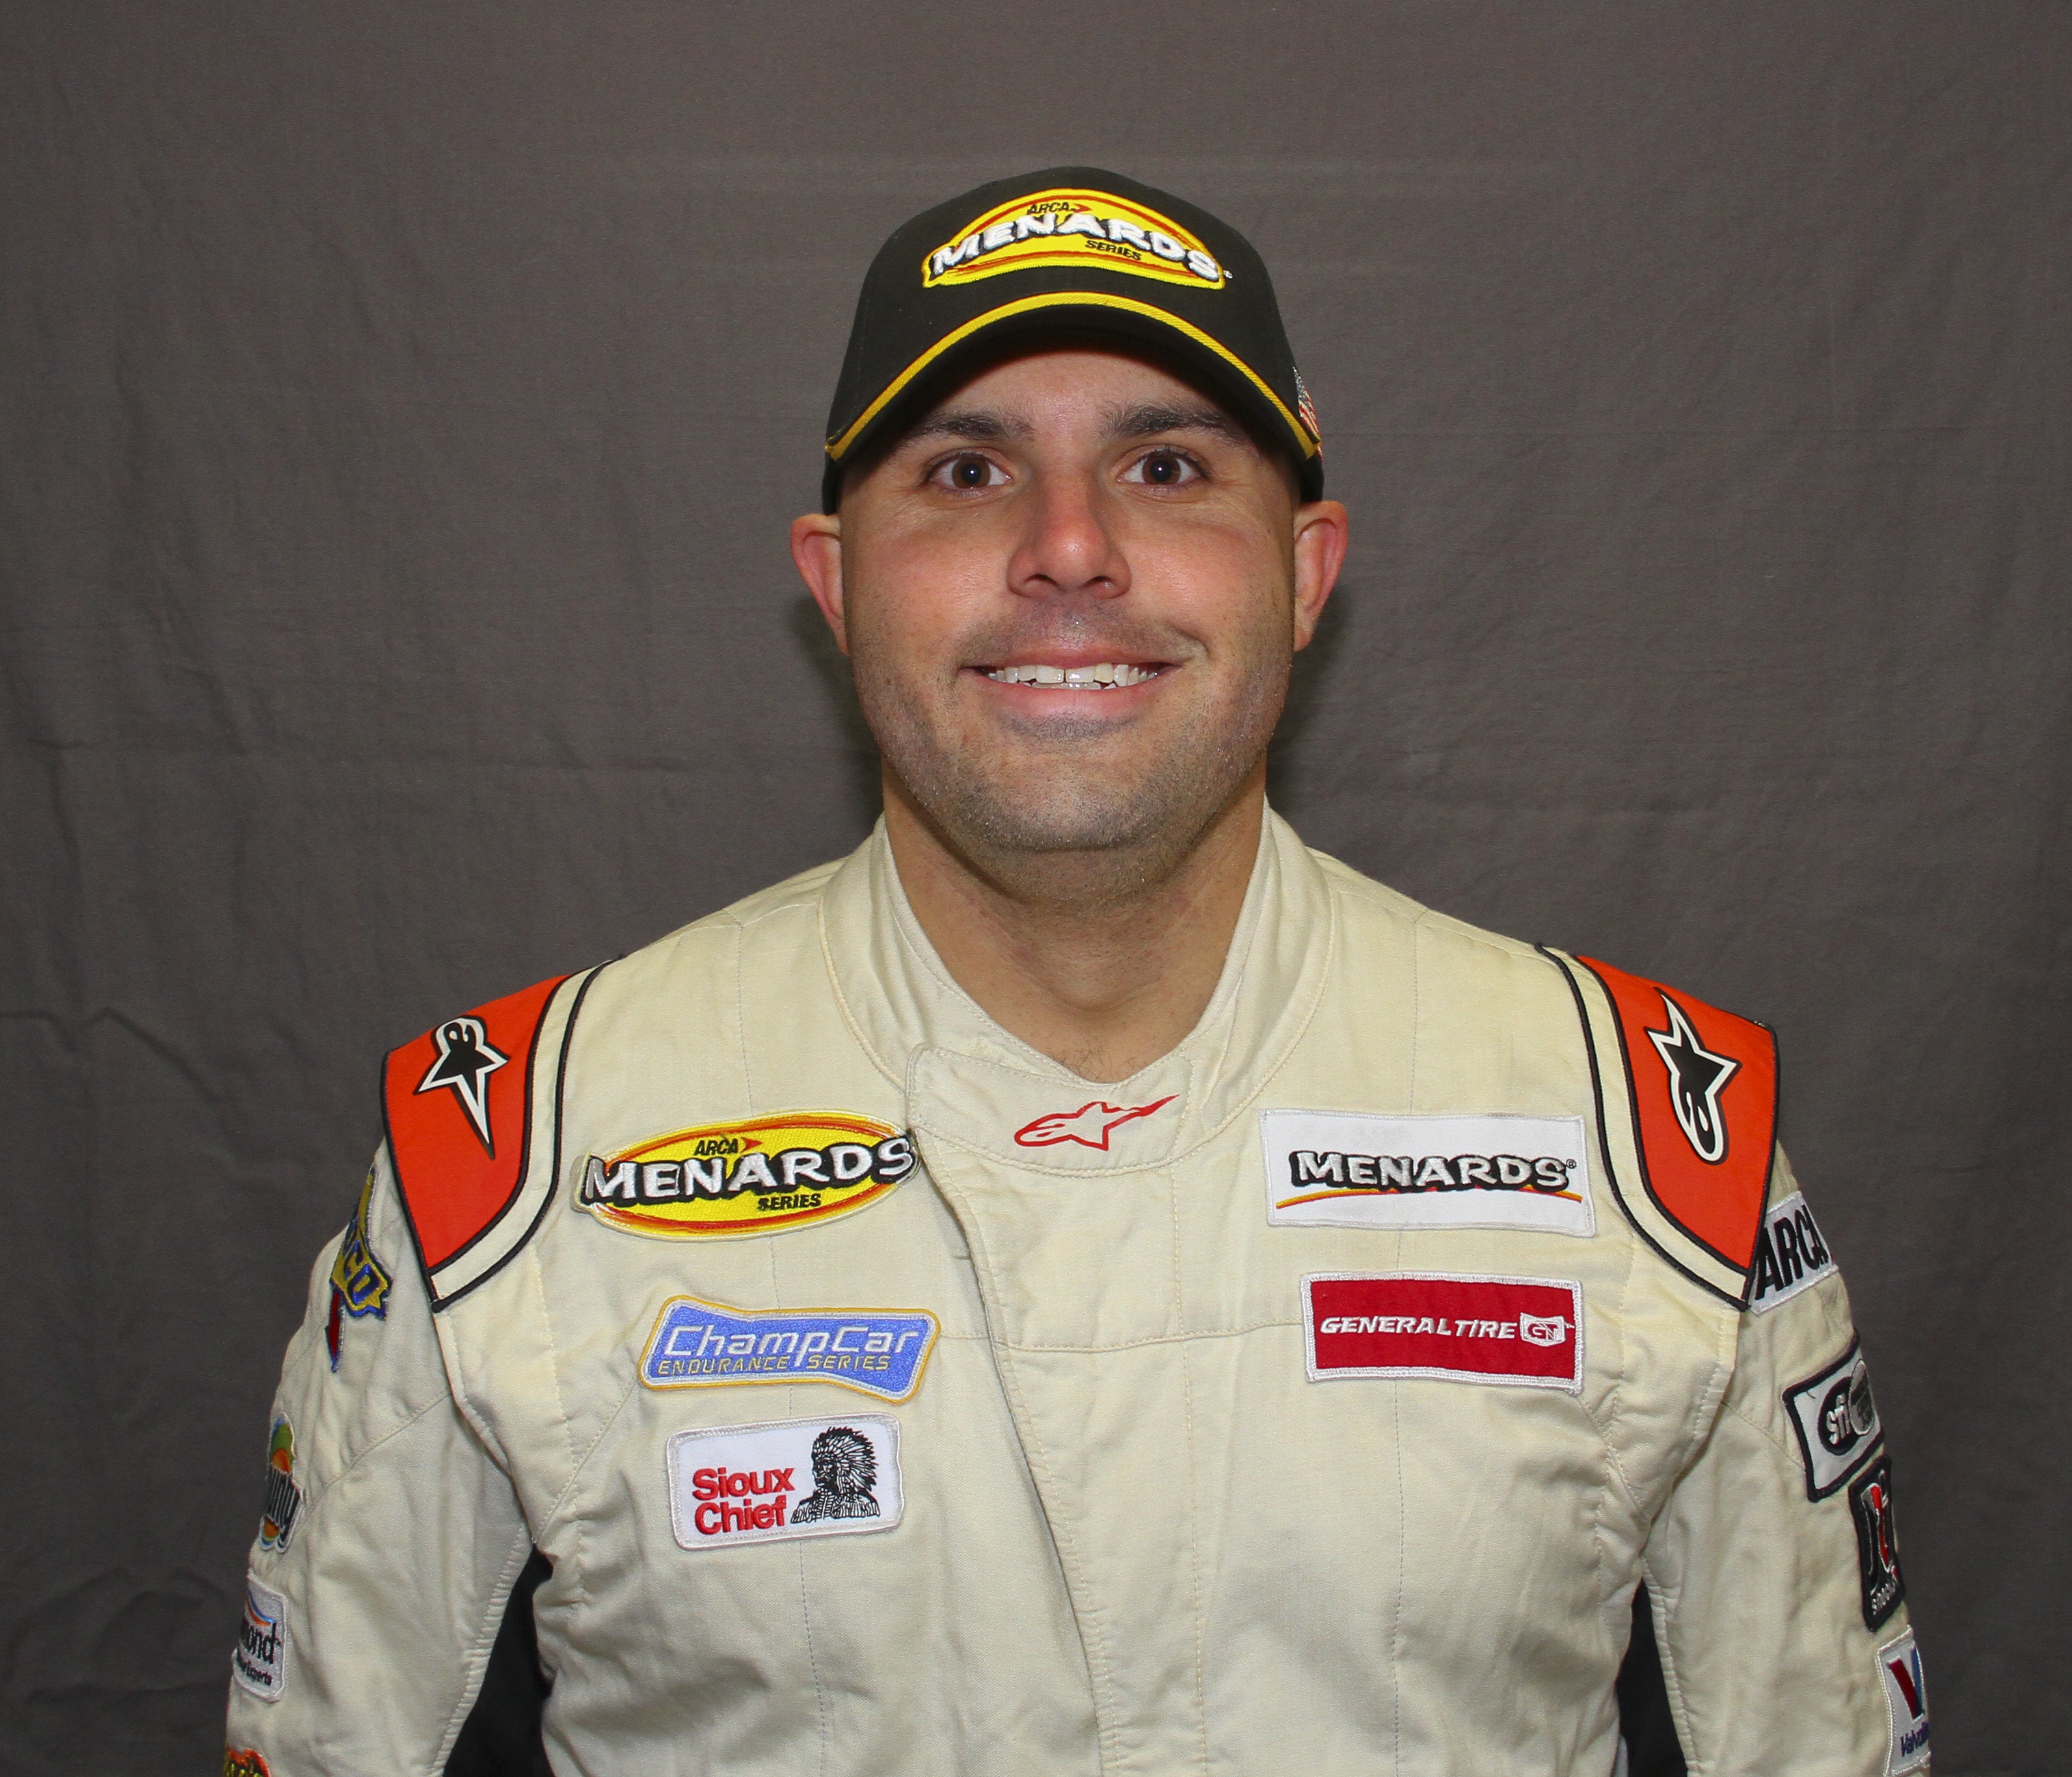 Headshot of CSM graduate Kyle Lockrow, dressed in a racing jumpsuit and smiling at the camera